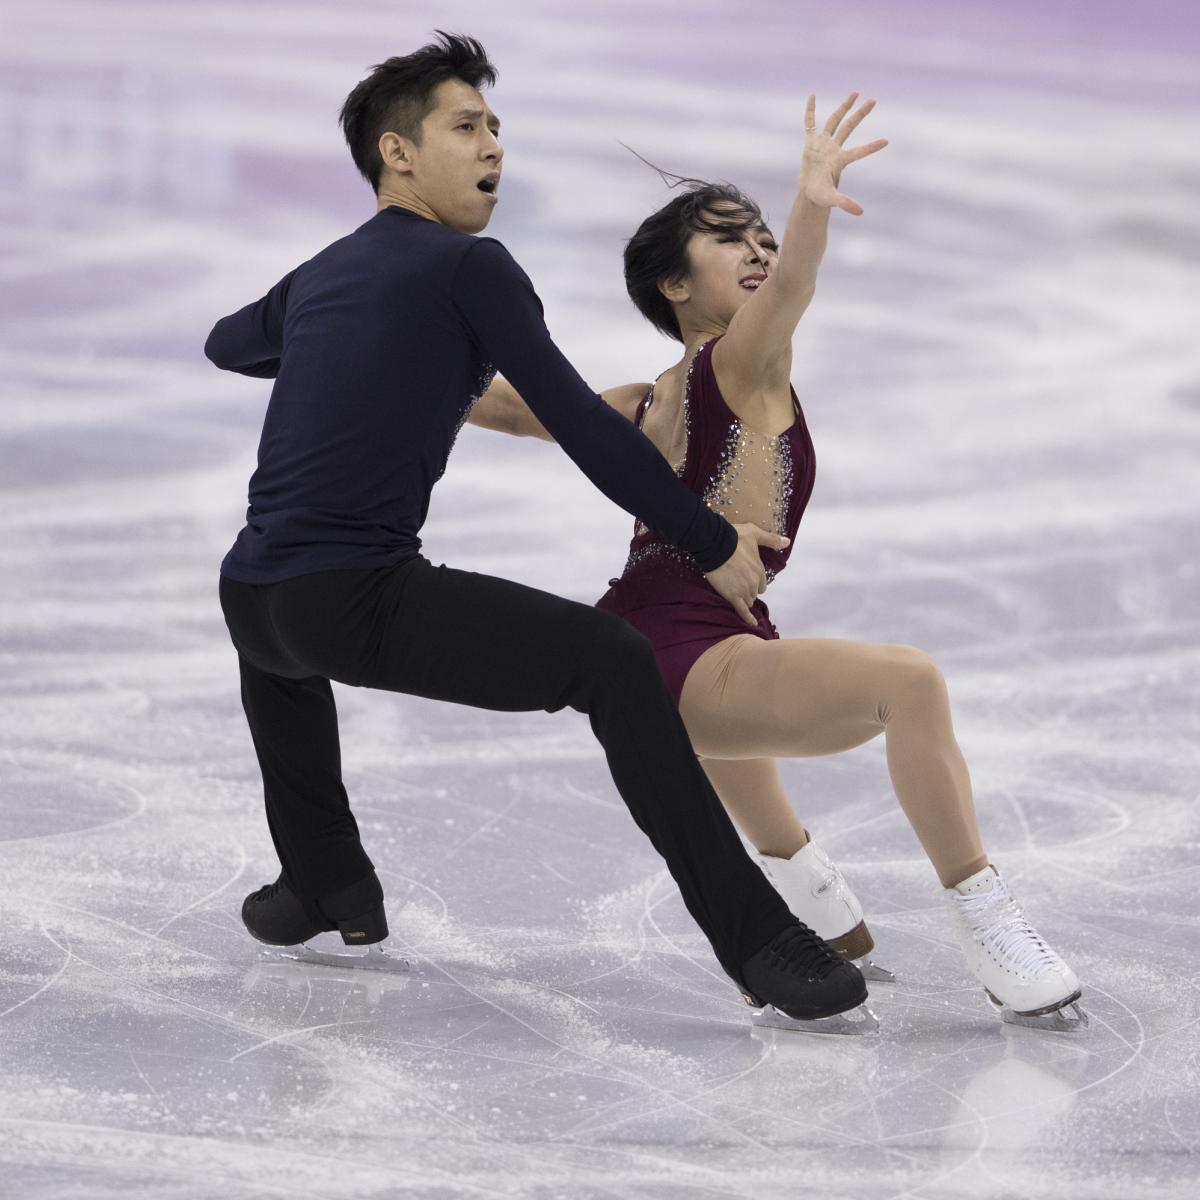 Olympic Figure Skating Schedule 2018: Pairs Free Skate TV, Live-Stream